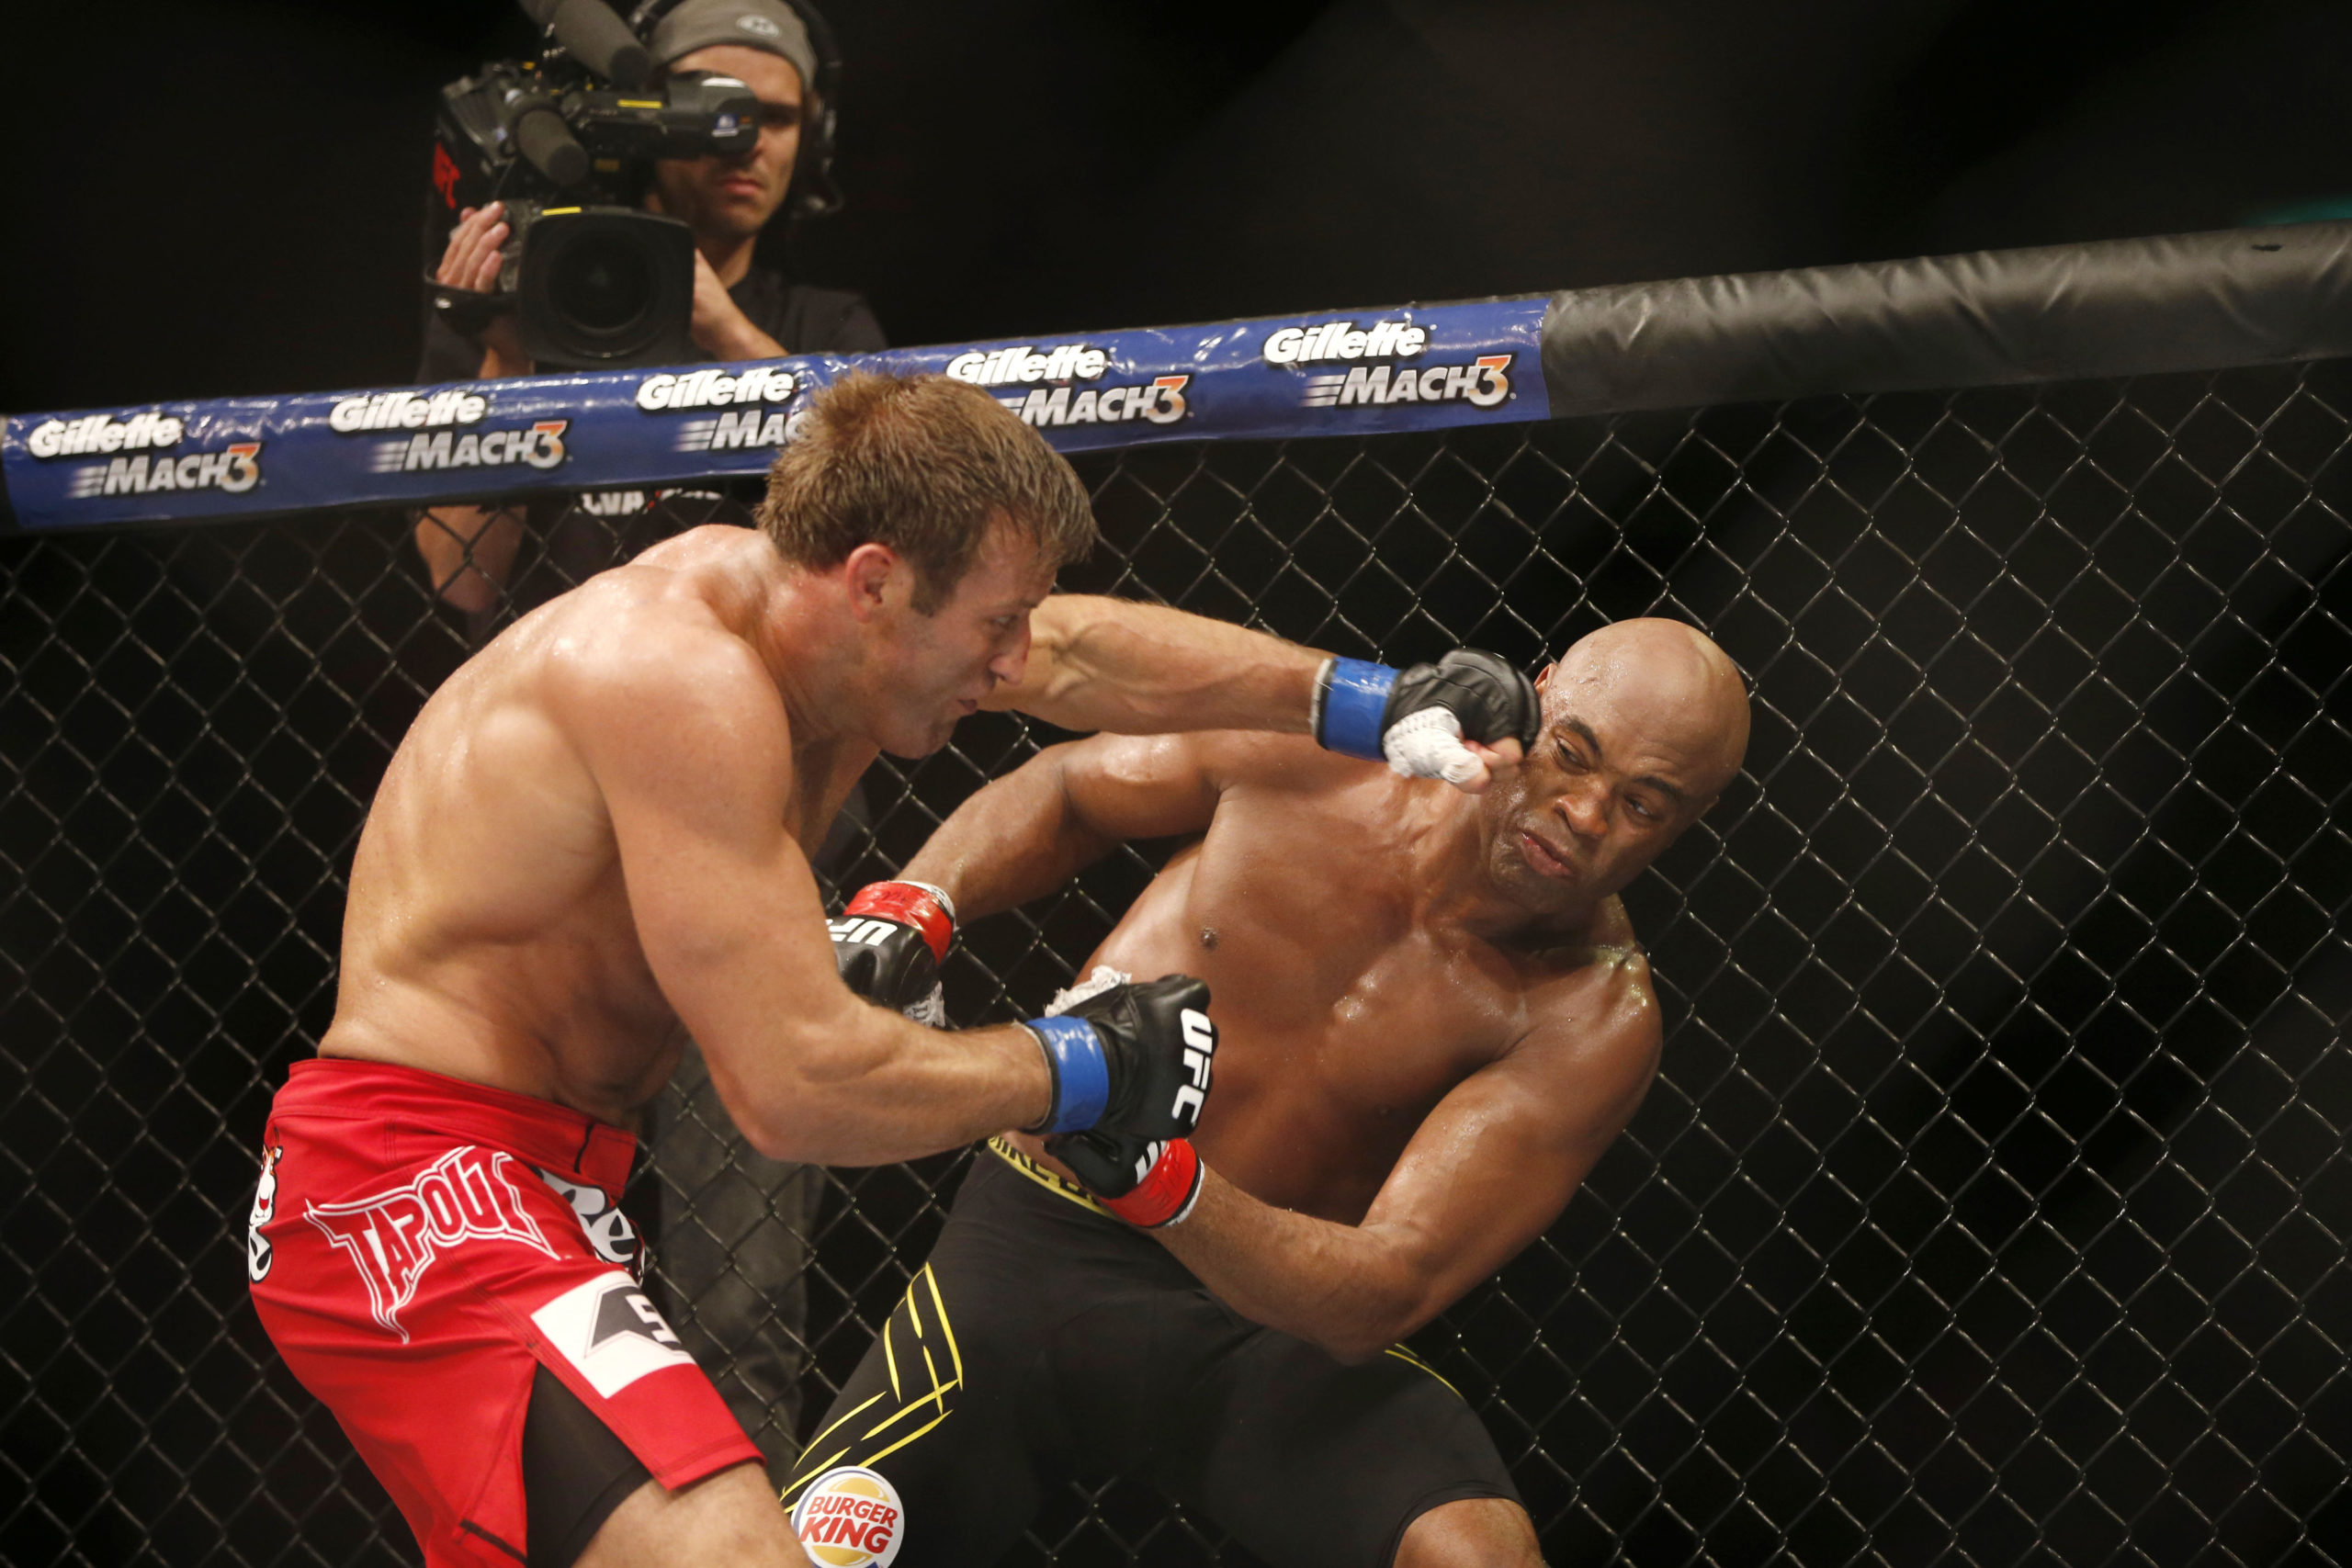 Anderson Silva, right, of Brazil, fights Stephan Bonnar, of the United States, during their light heavyweight mixed martial arts bout at the Ultimate Fighting Championship (UFC) 153 in Rio de Janeiro, Oct. 14, 2012.